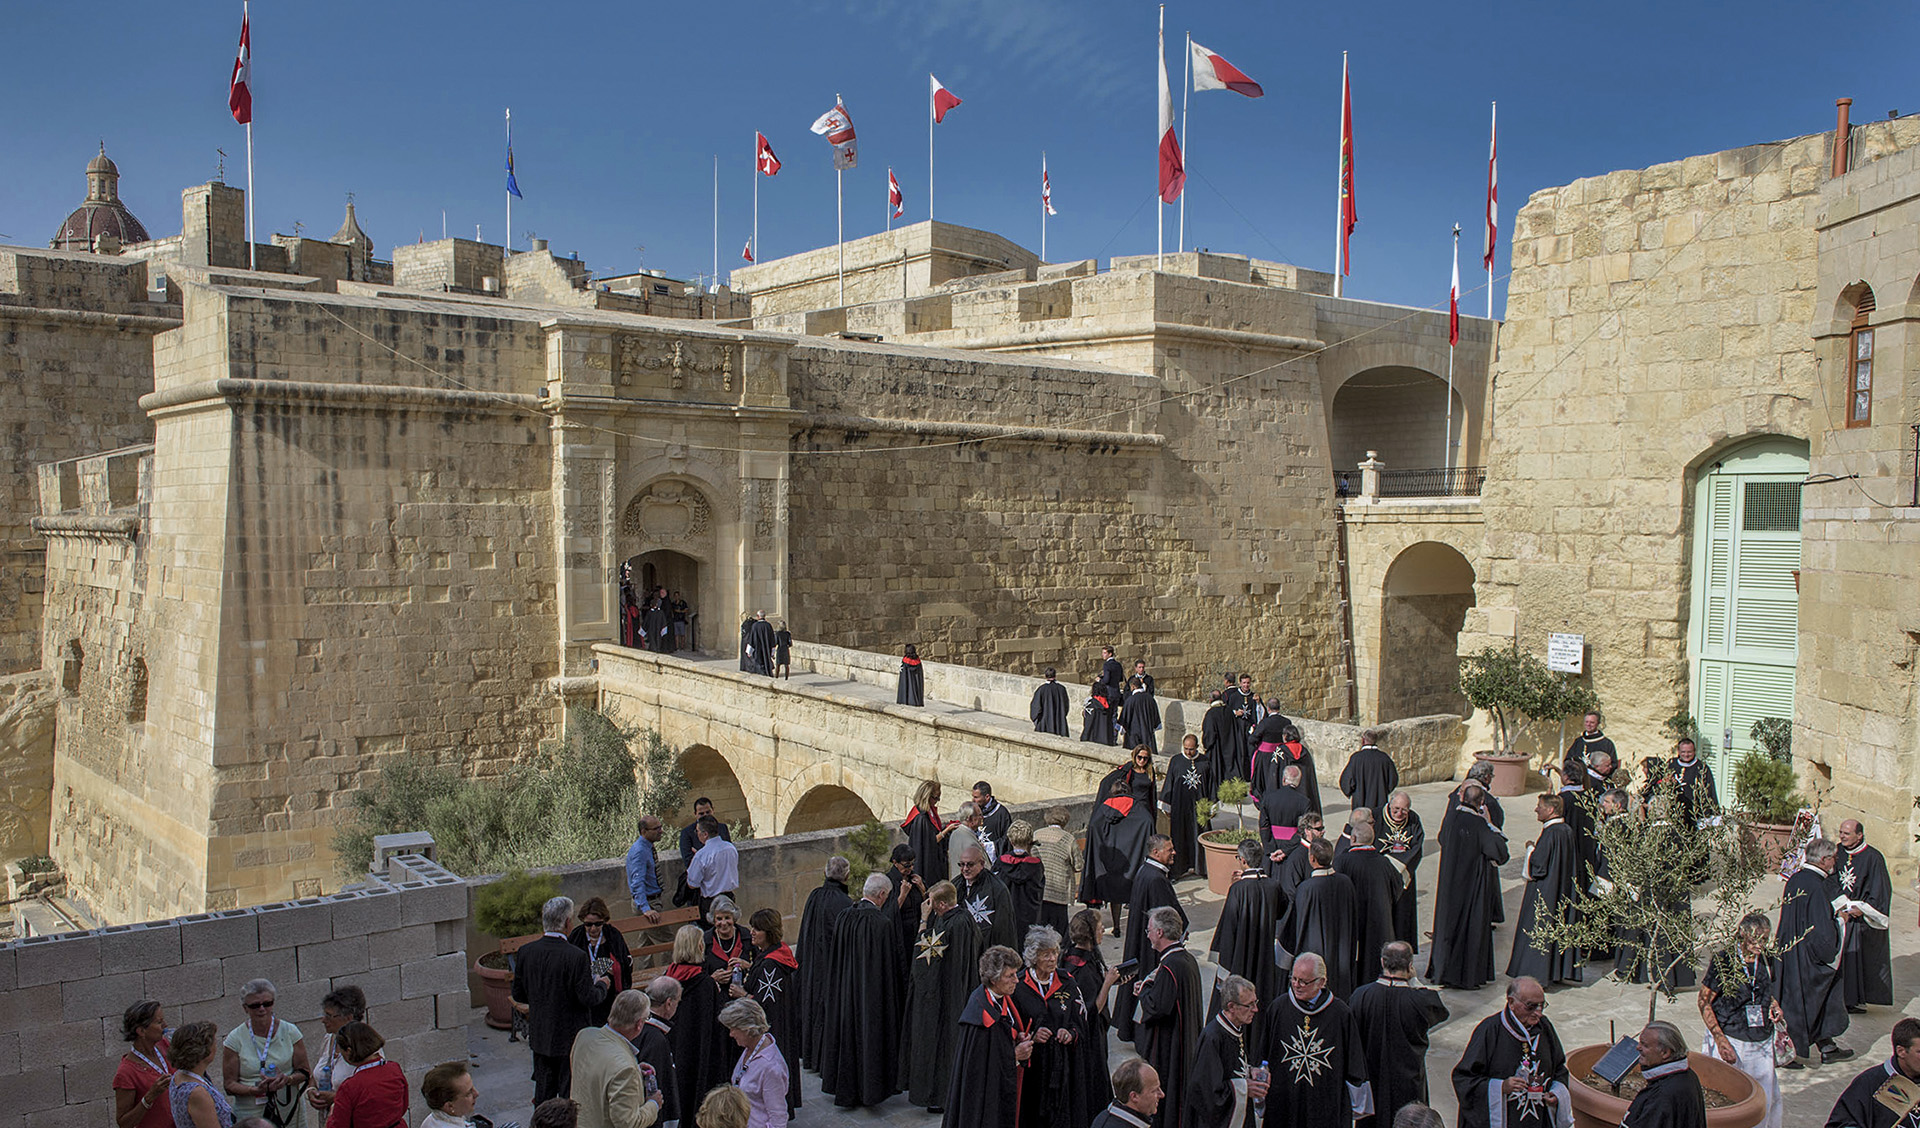 The Great Siege of Malta 450 years ago